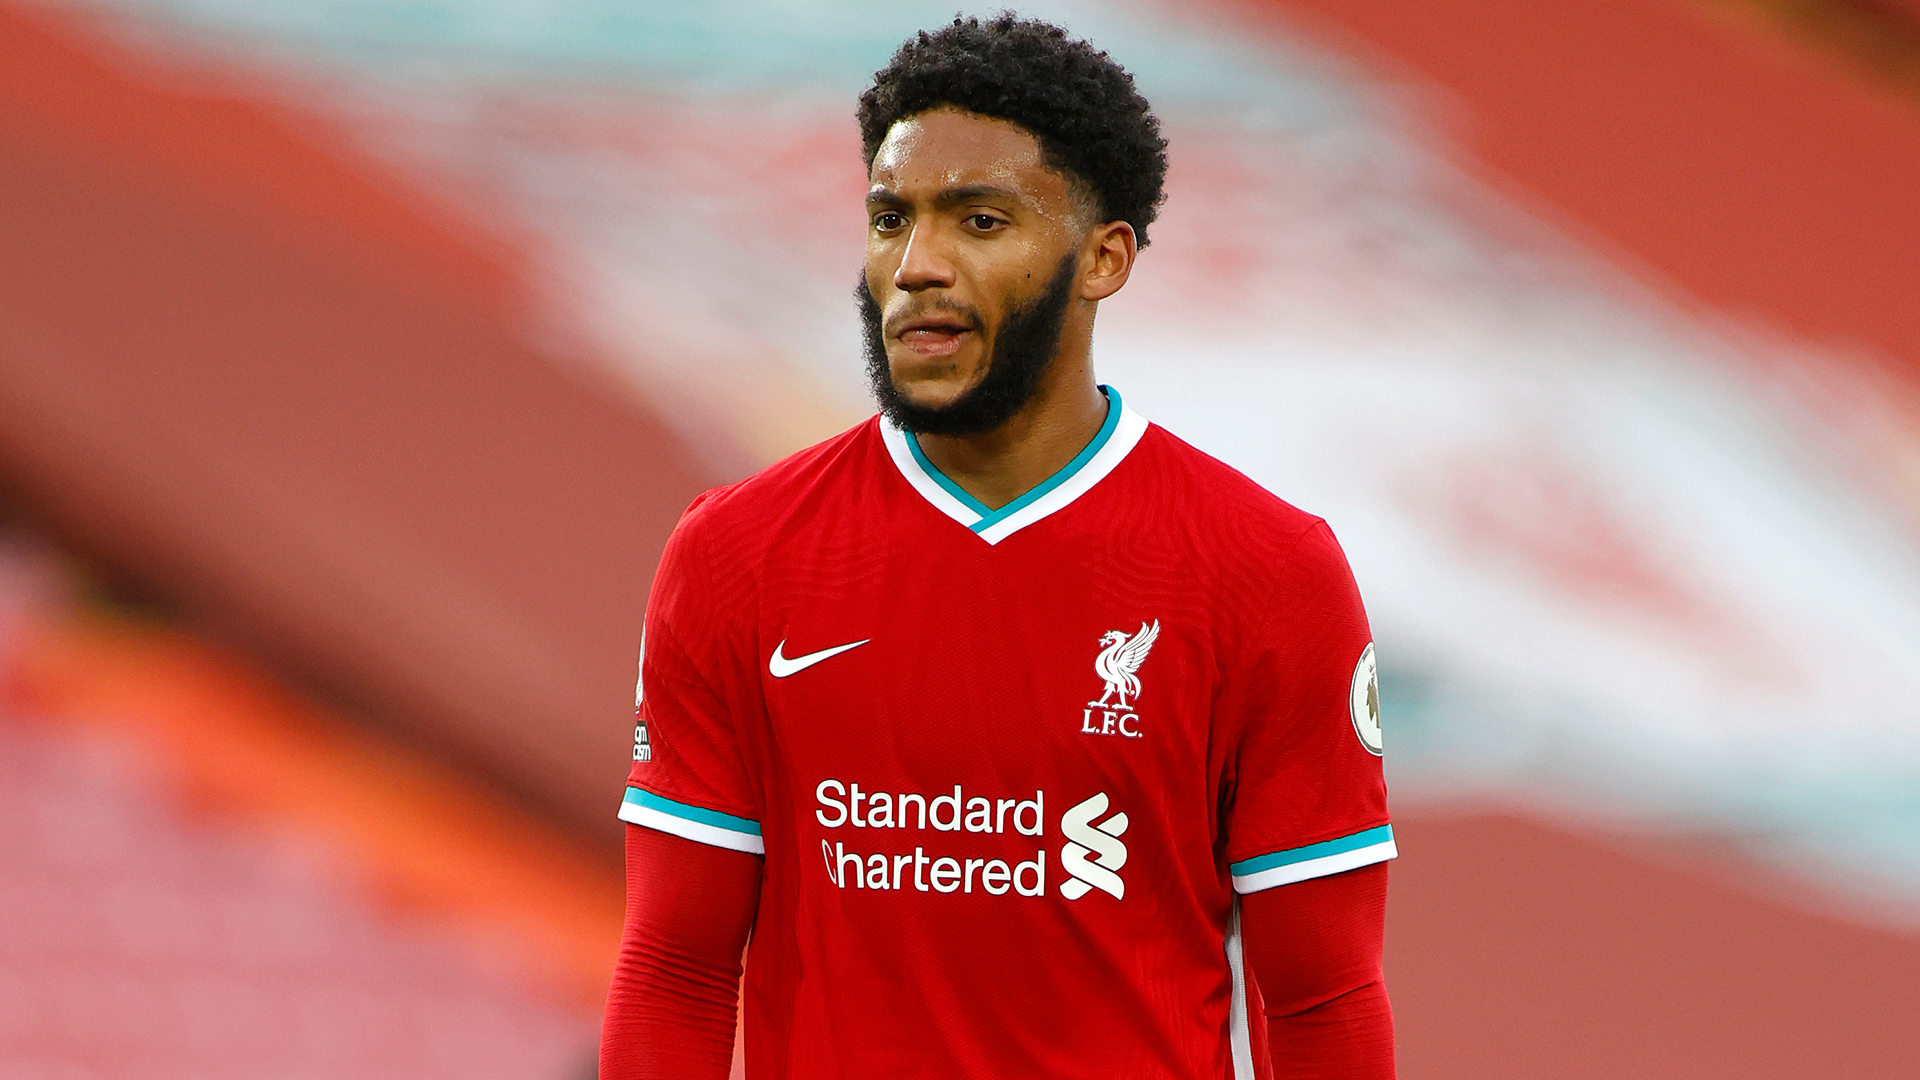 Liverpool boss Klopp offers injury update on Alexander-Arnold and Gomez